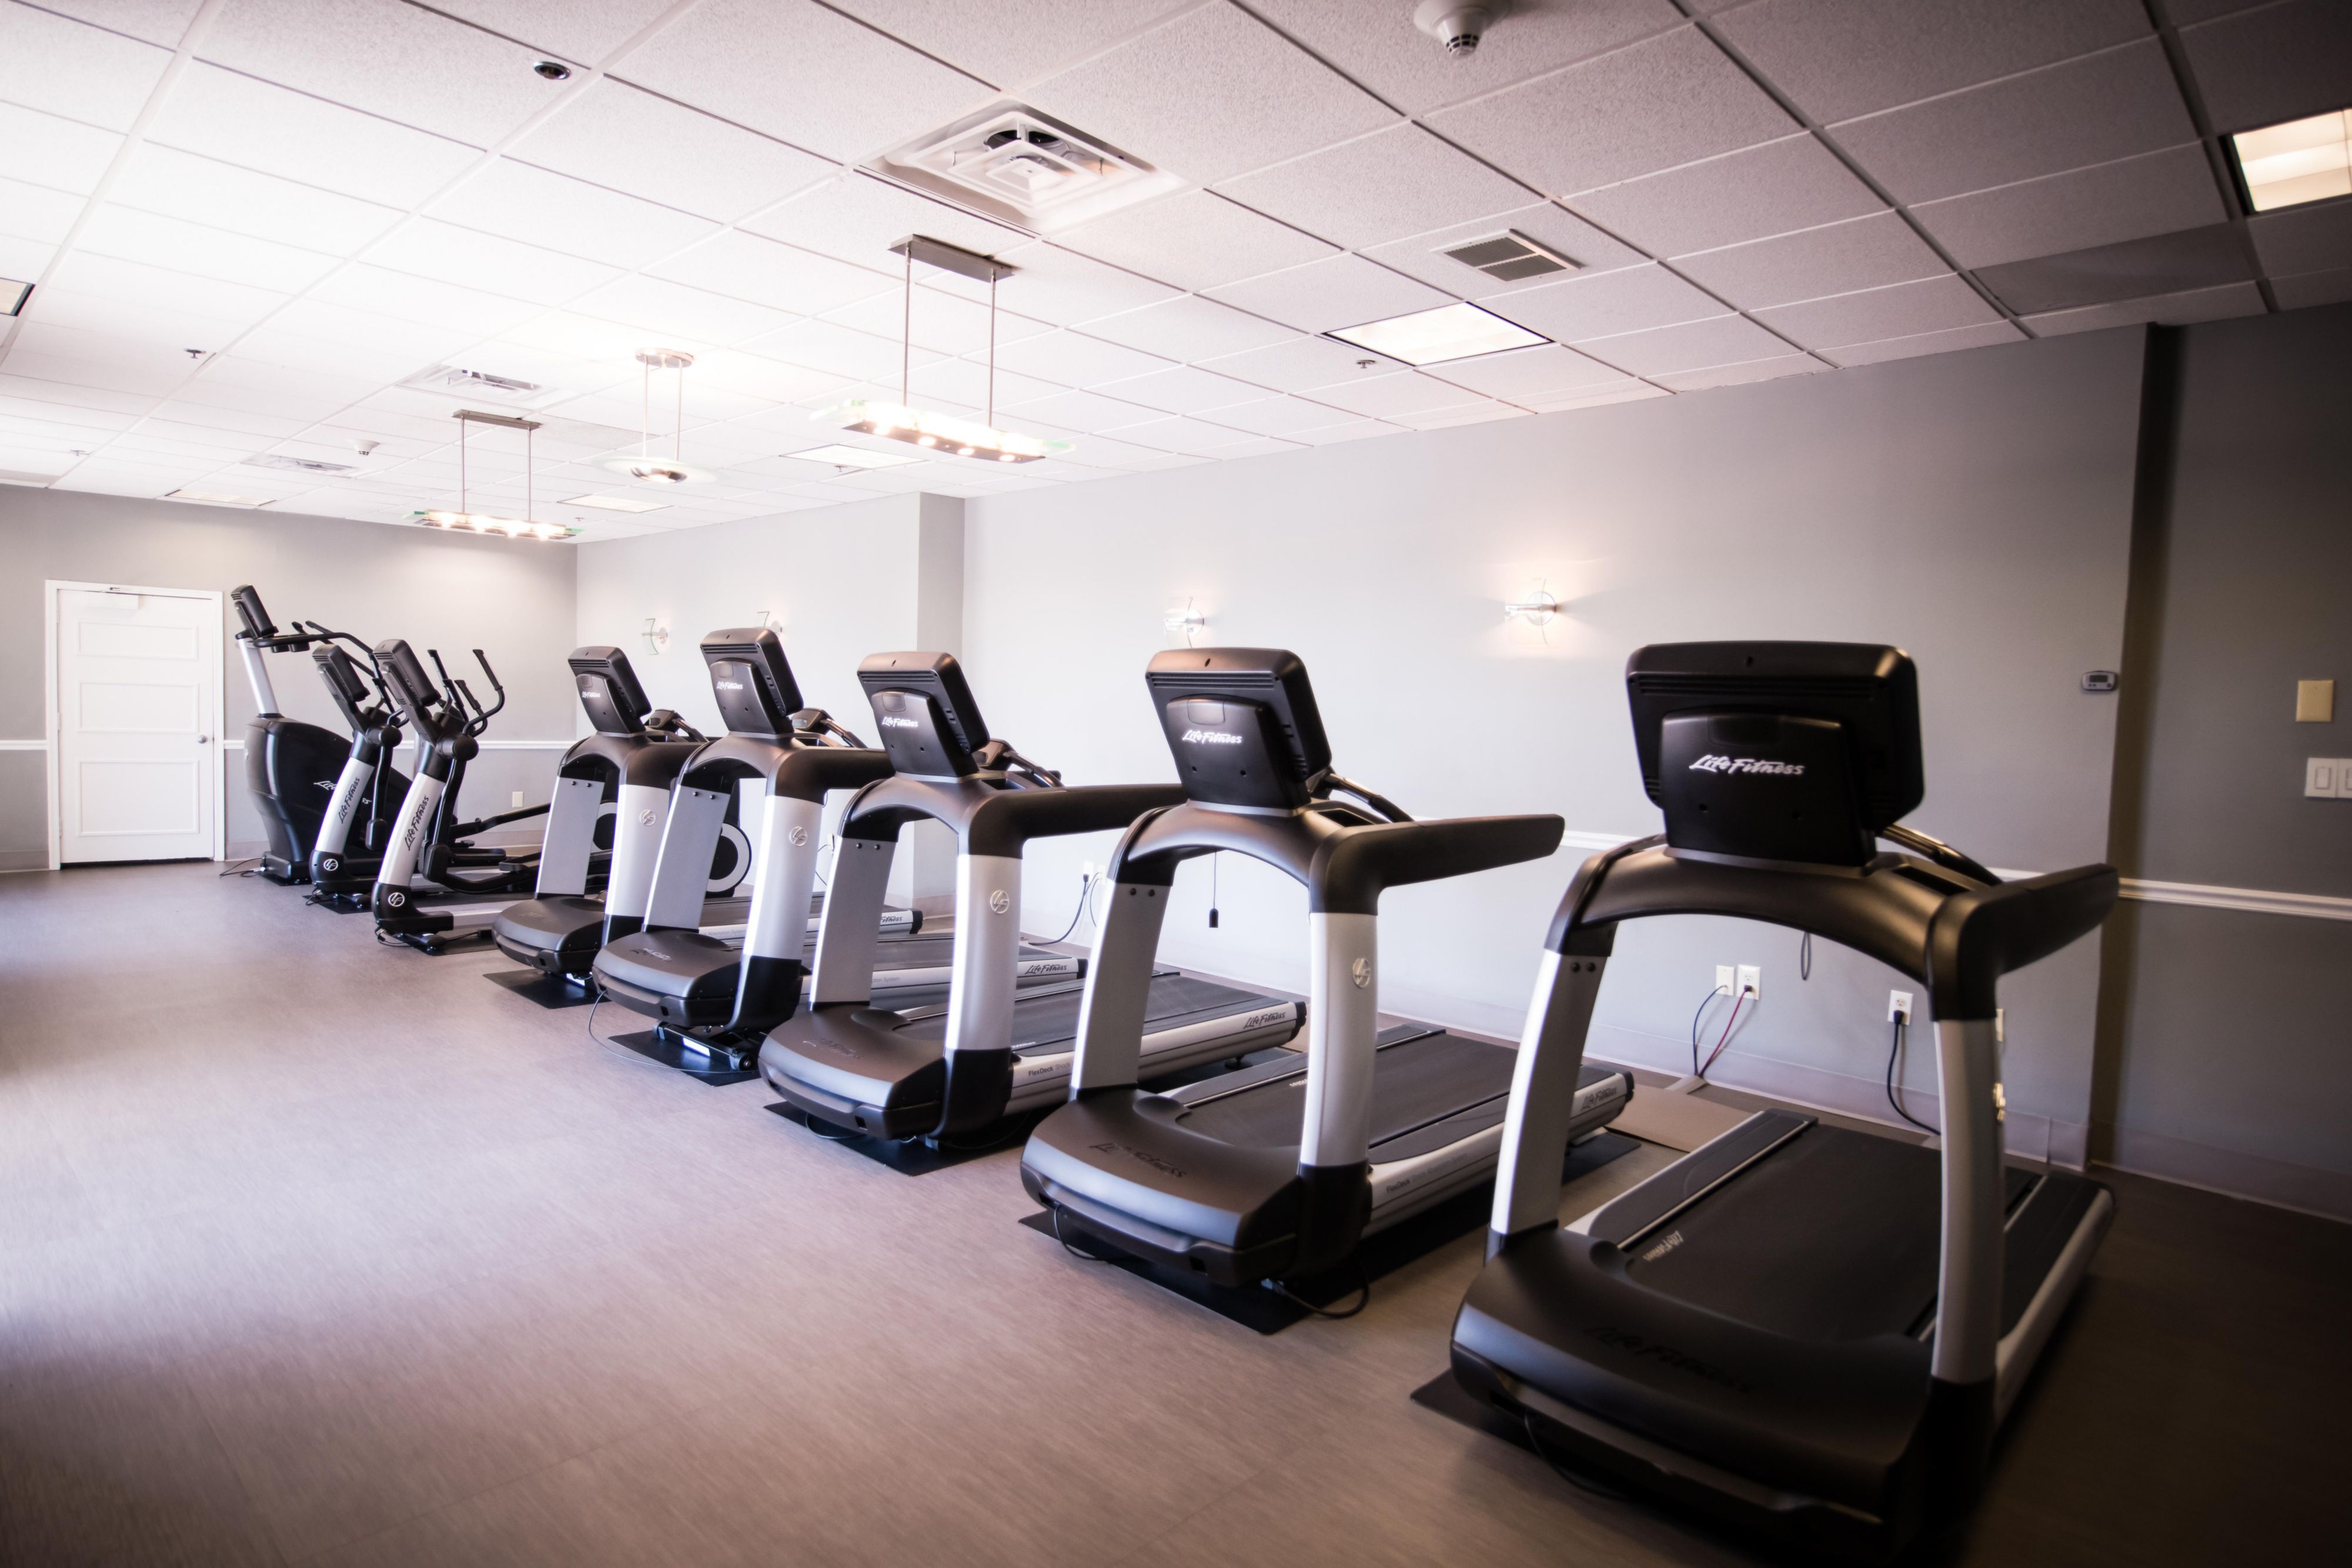 Run, climb, or cycle your way to a better you in our cardio room